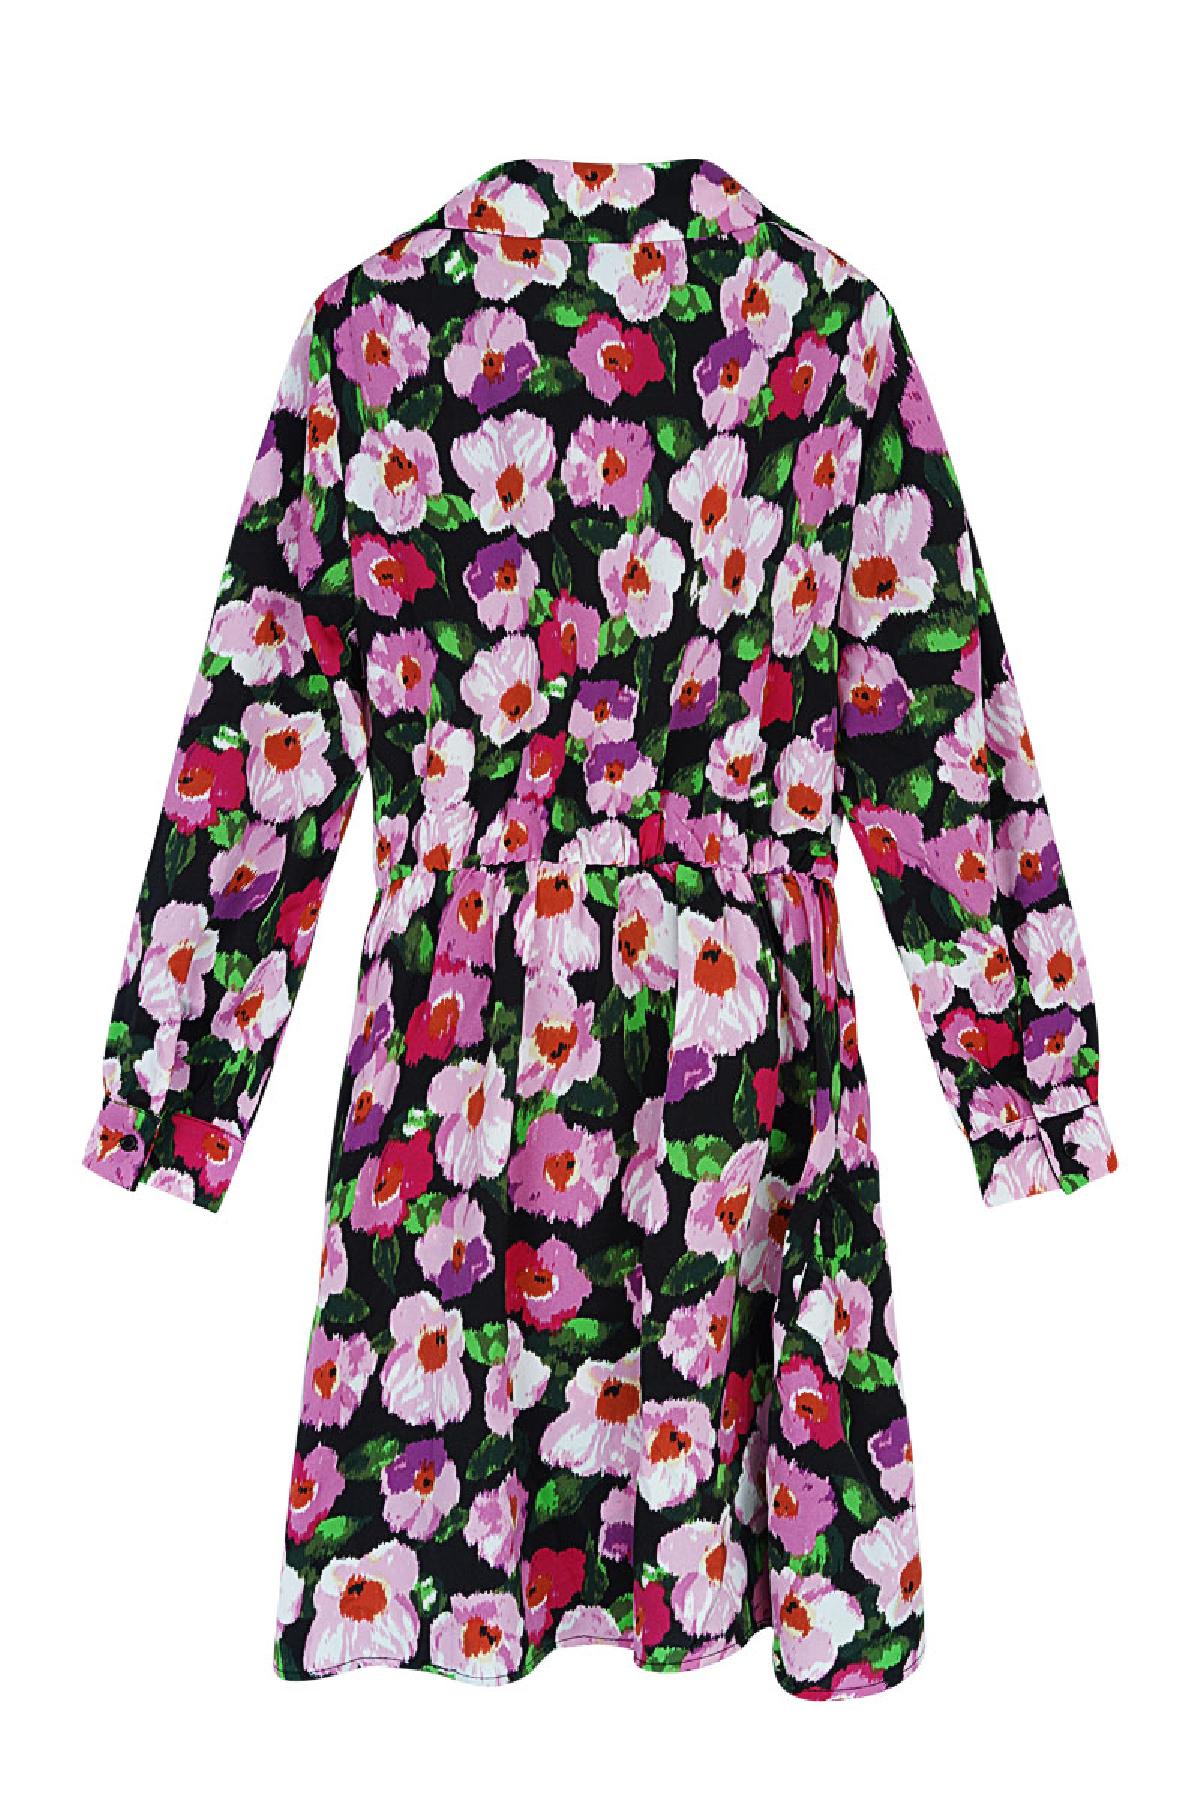 Flower print dress with button detail Black Multi S h5 Picture3